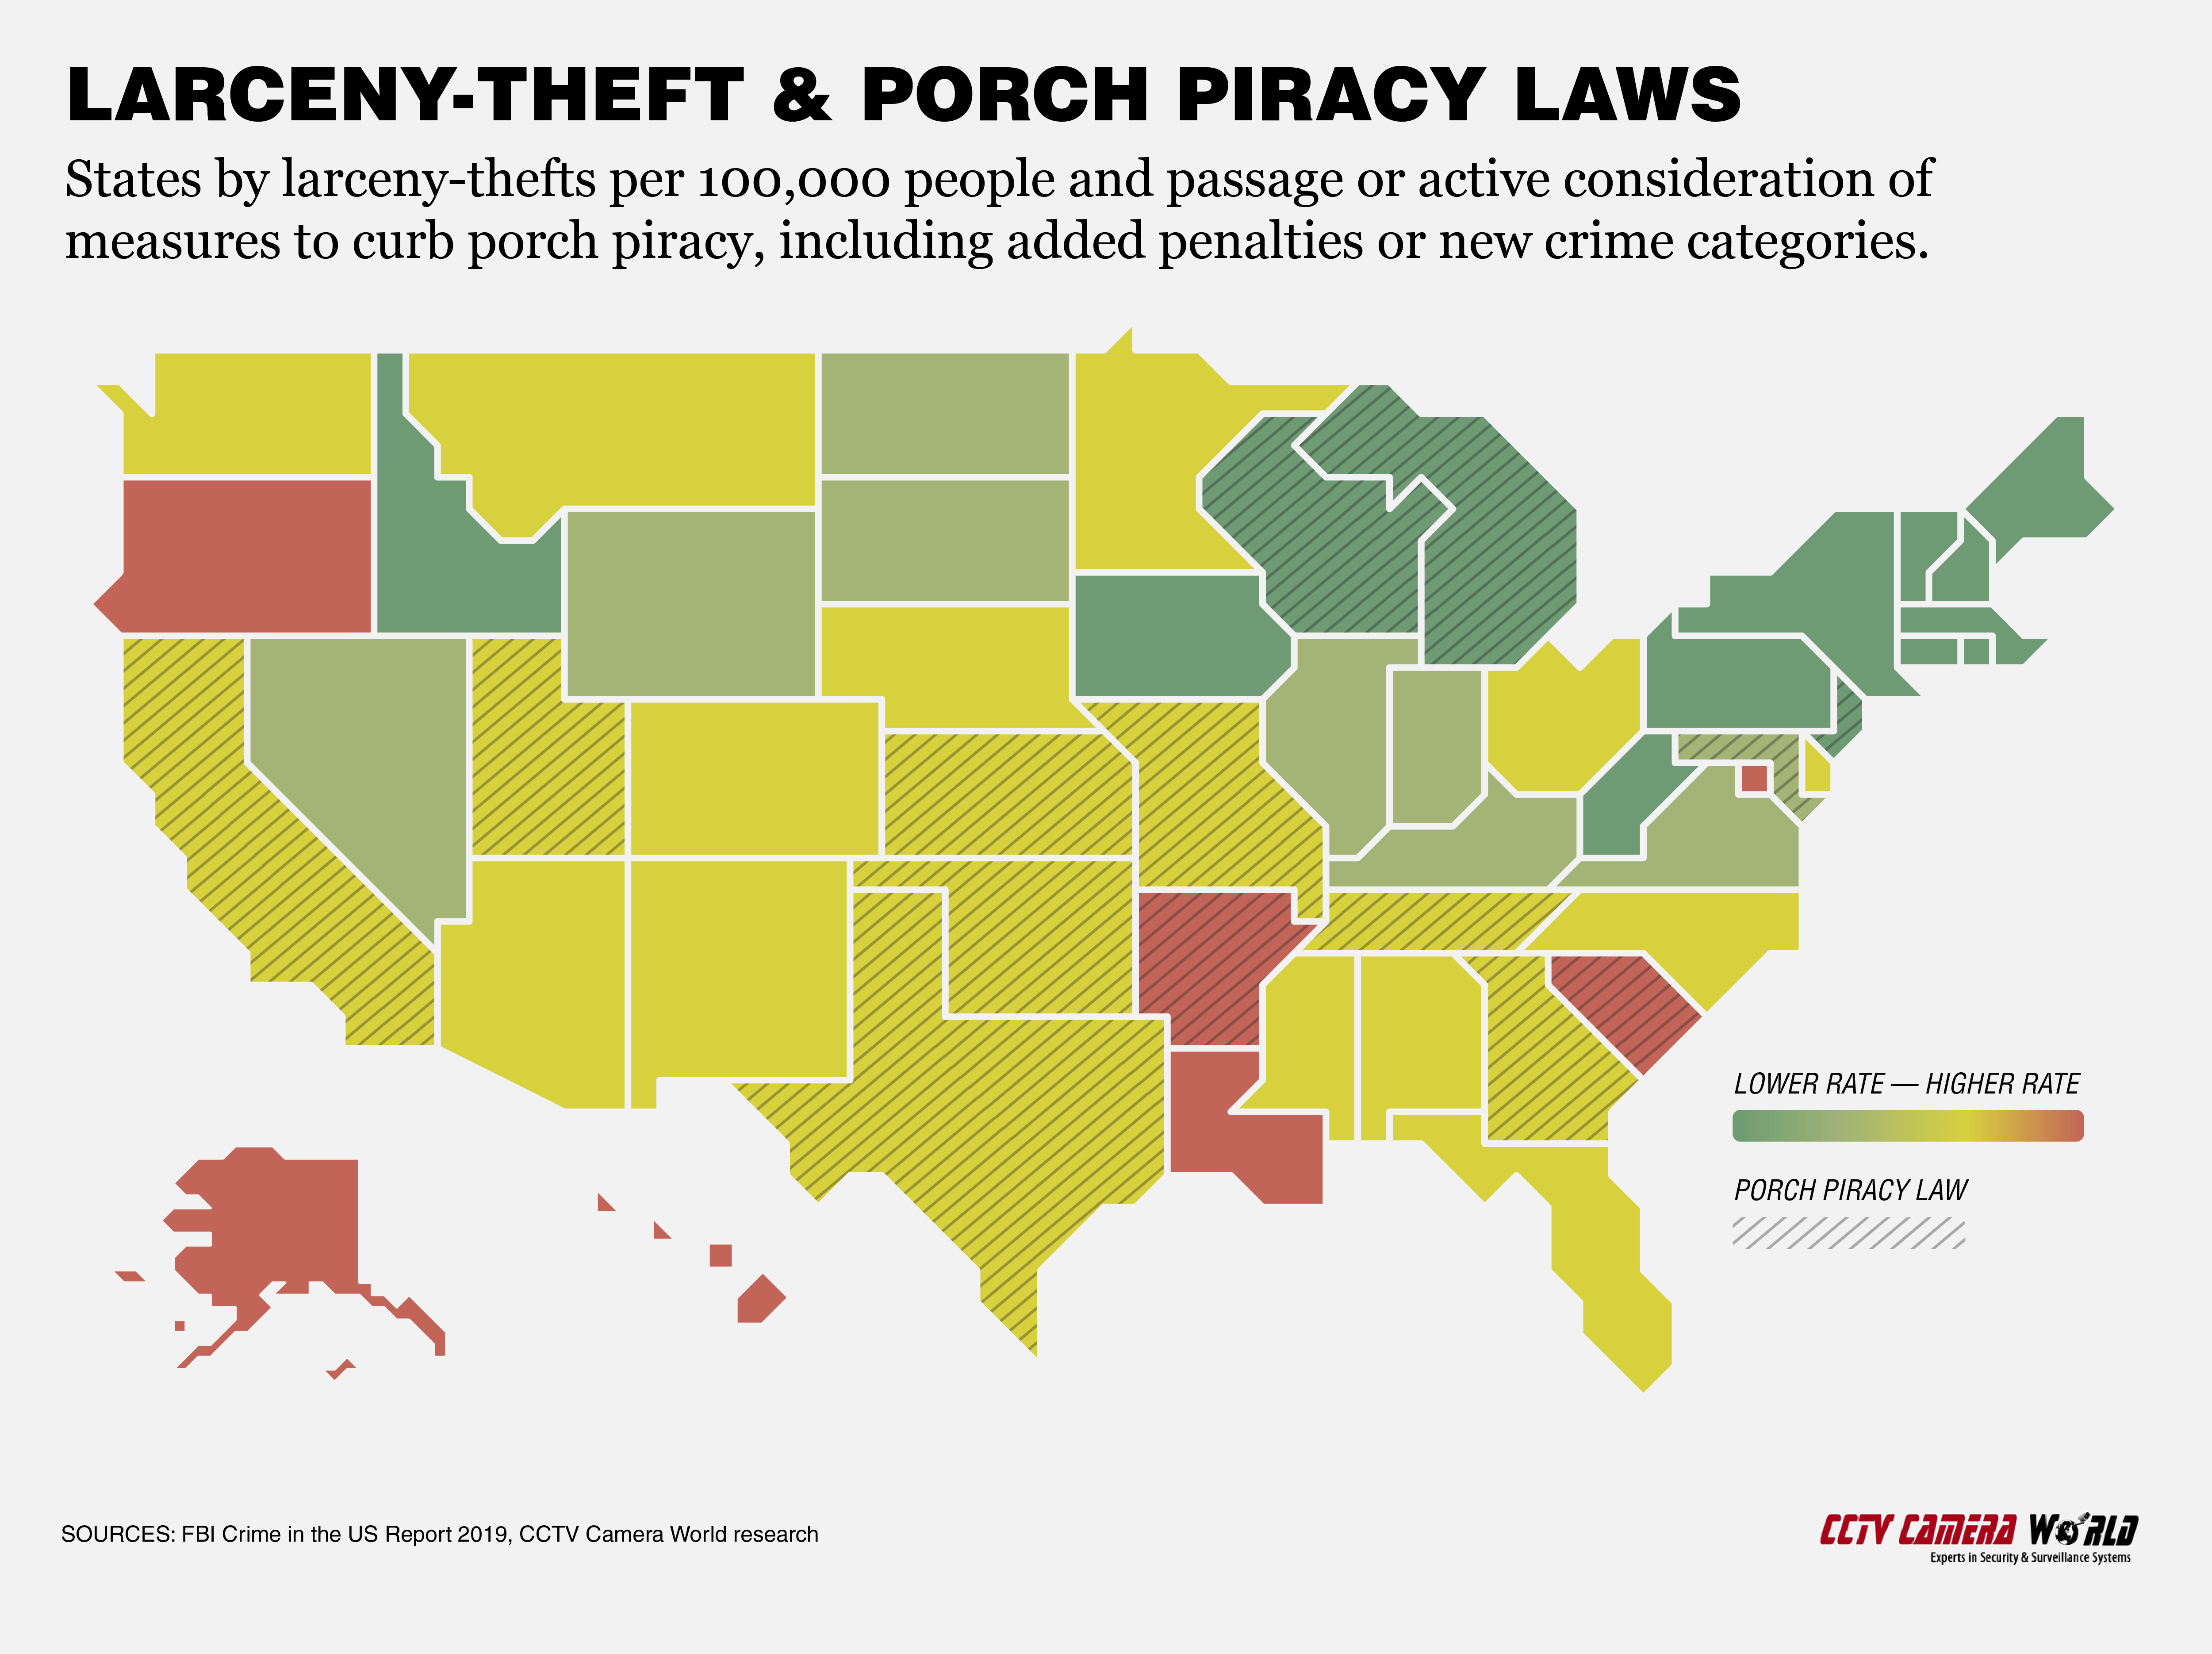 Larceny-theft rate by state and porch piracy laws adopted or being actively considered